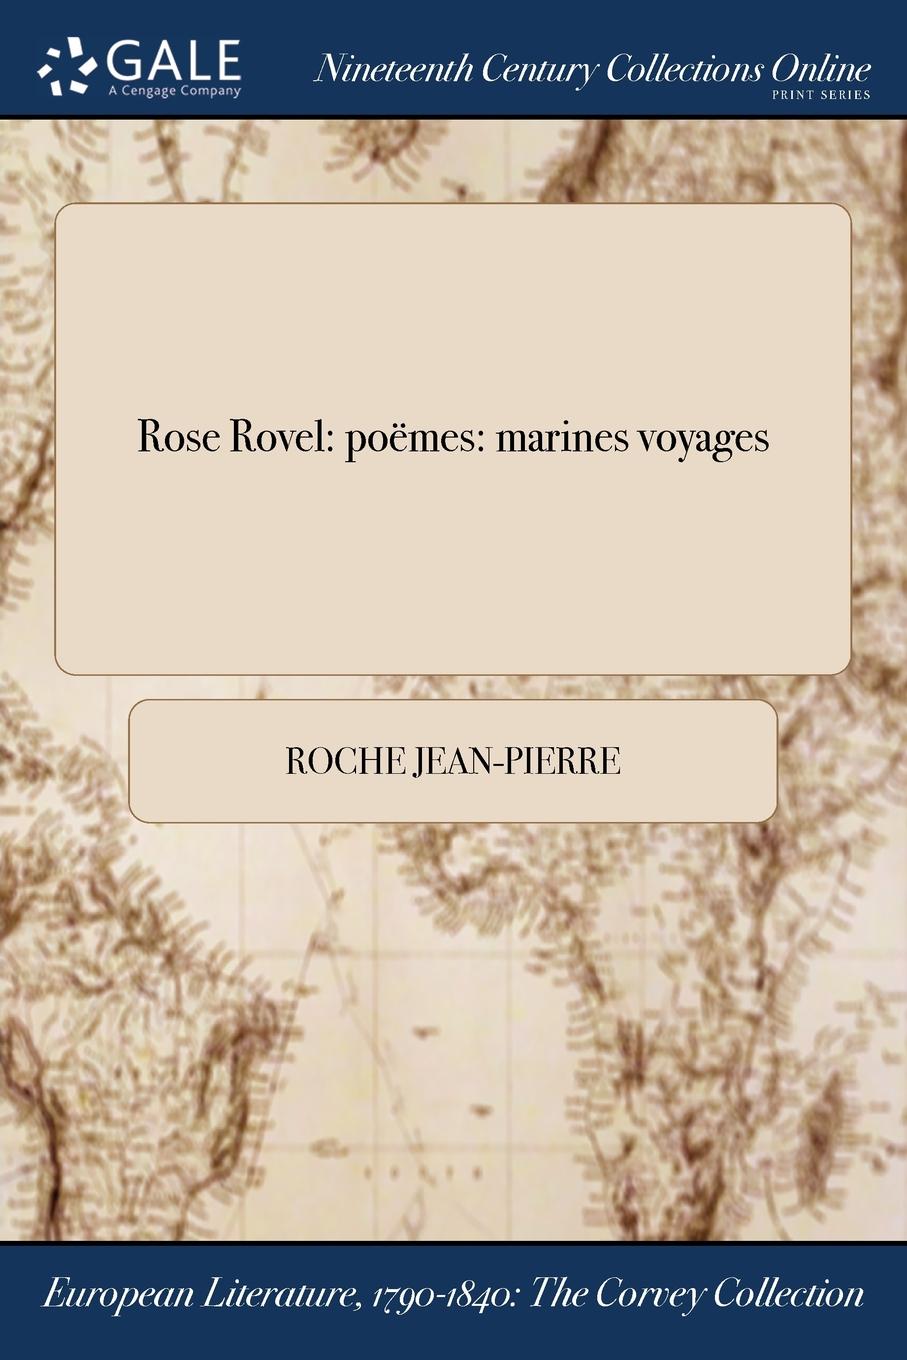 Rose Rovel. poemes: marines voyages